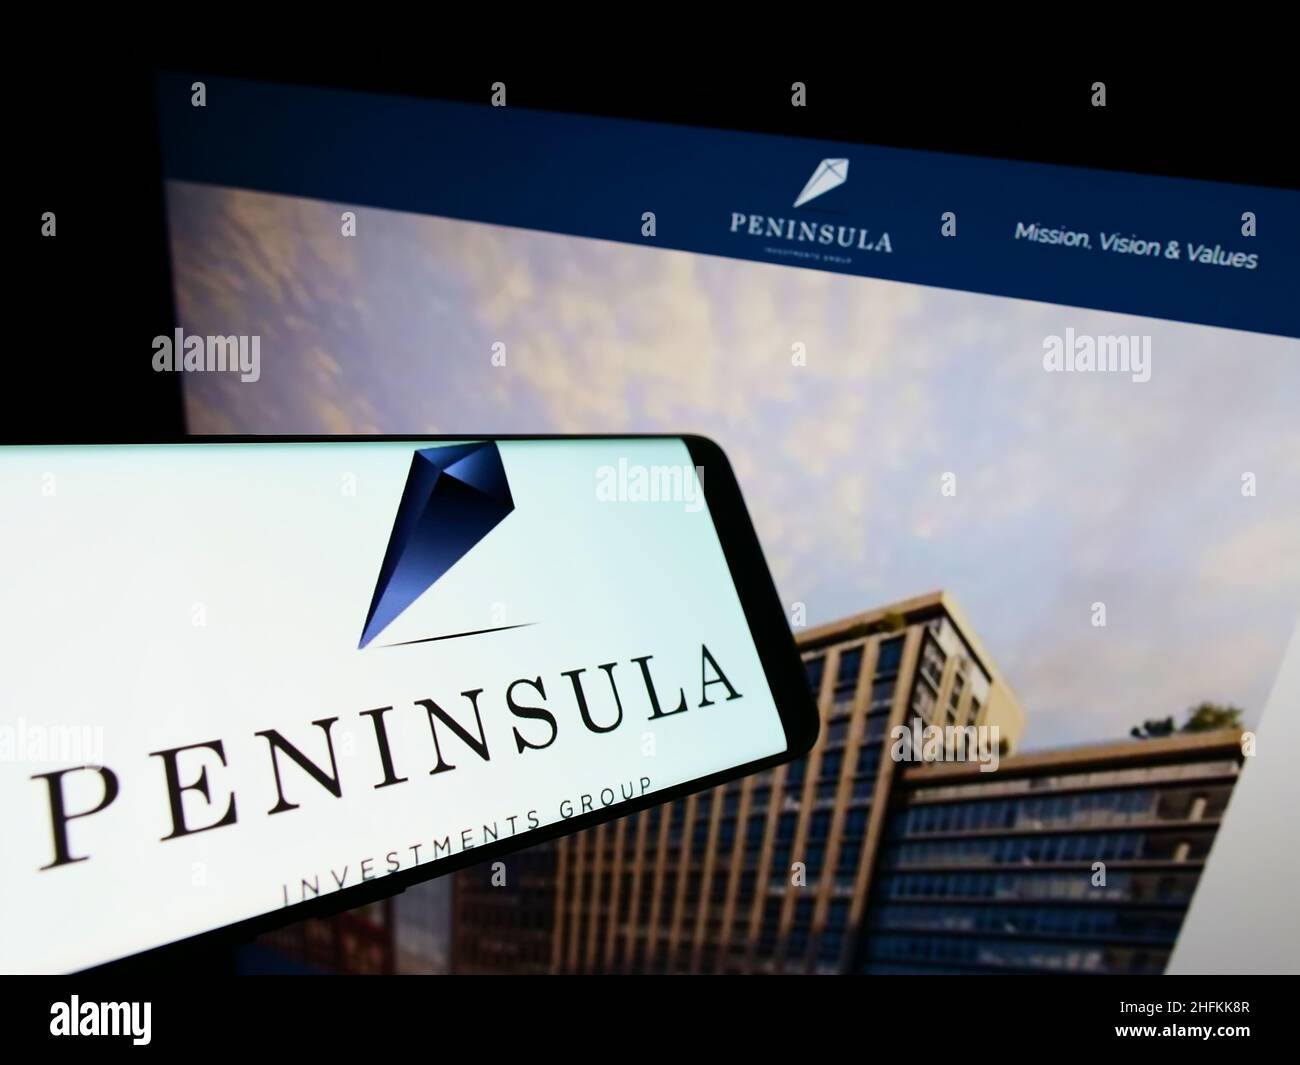 Smartphone with logo of company Peninsula Investments Group Capital LLC on screen in front of website. Focus on center-right of phone display. Stock Photo